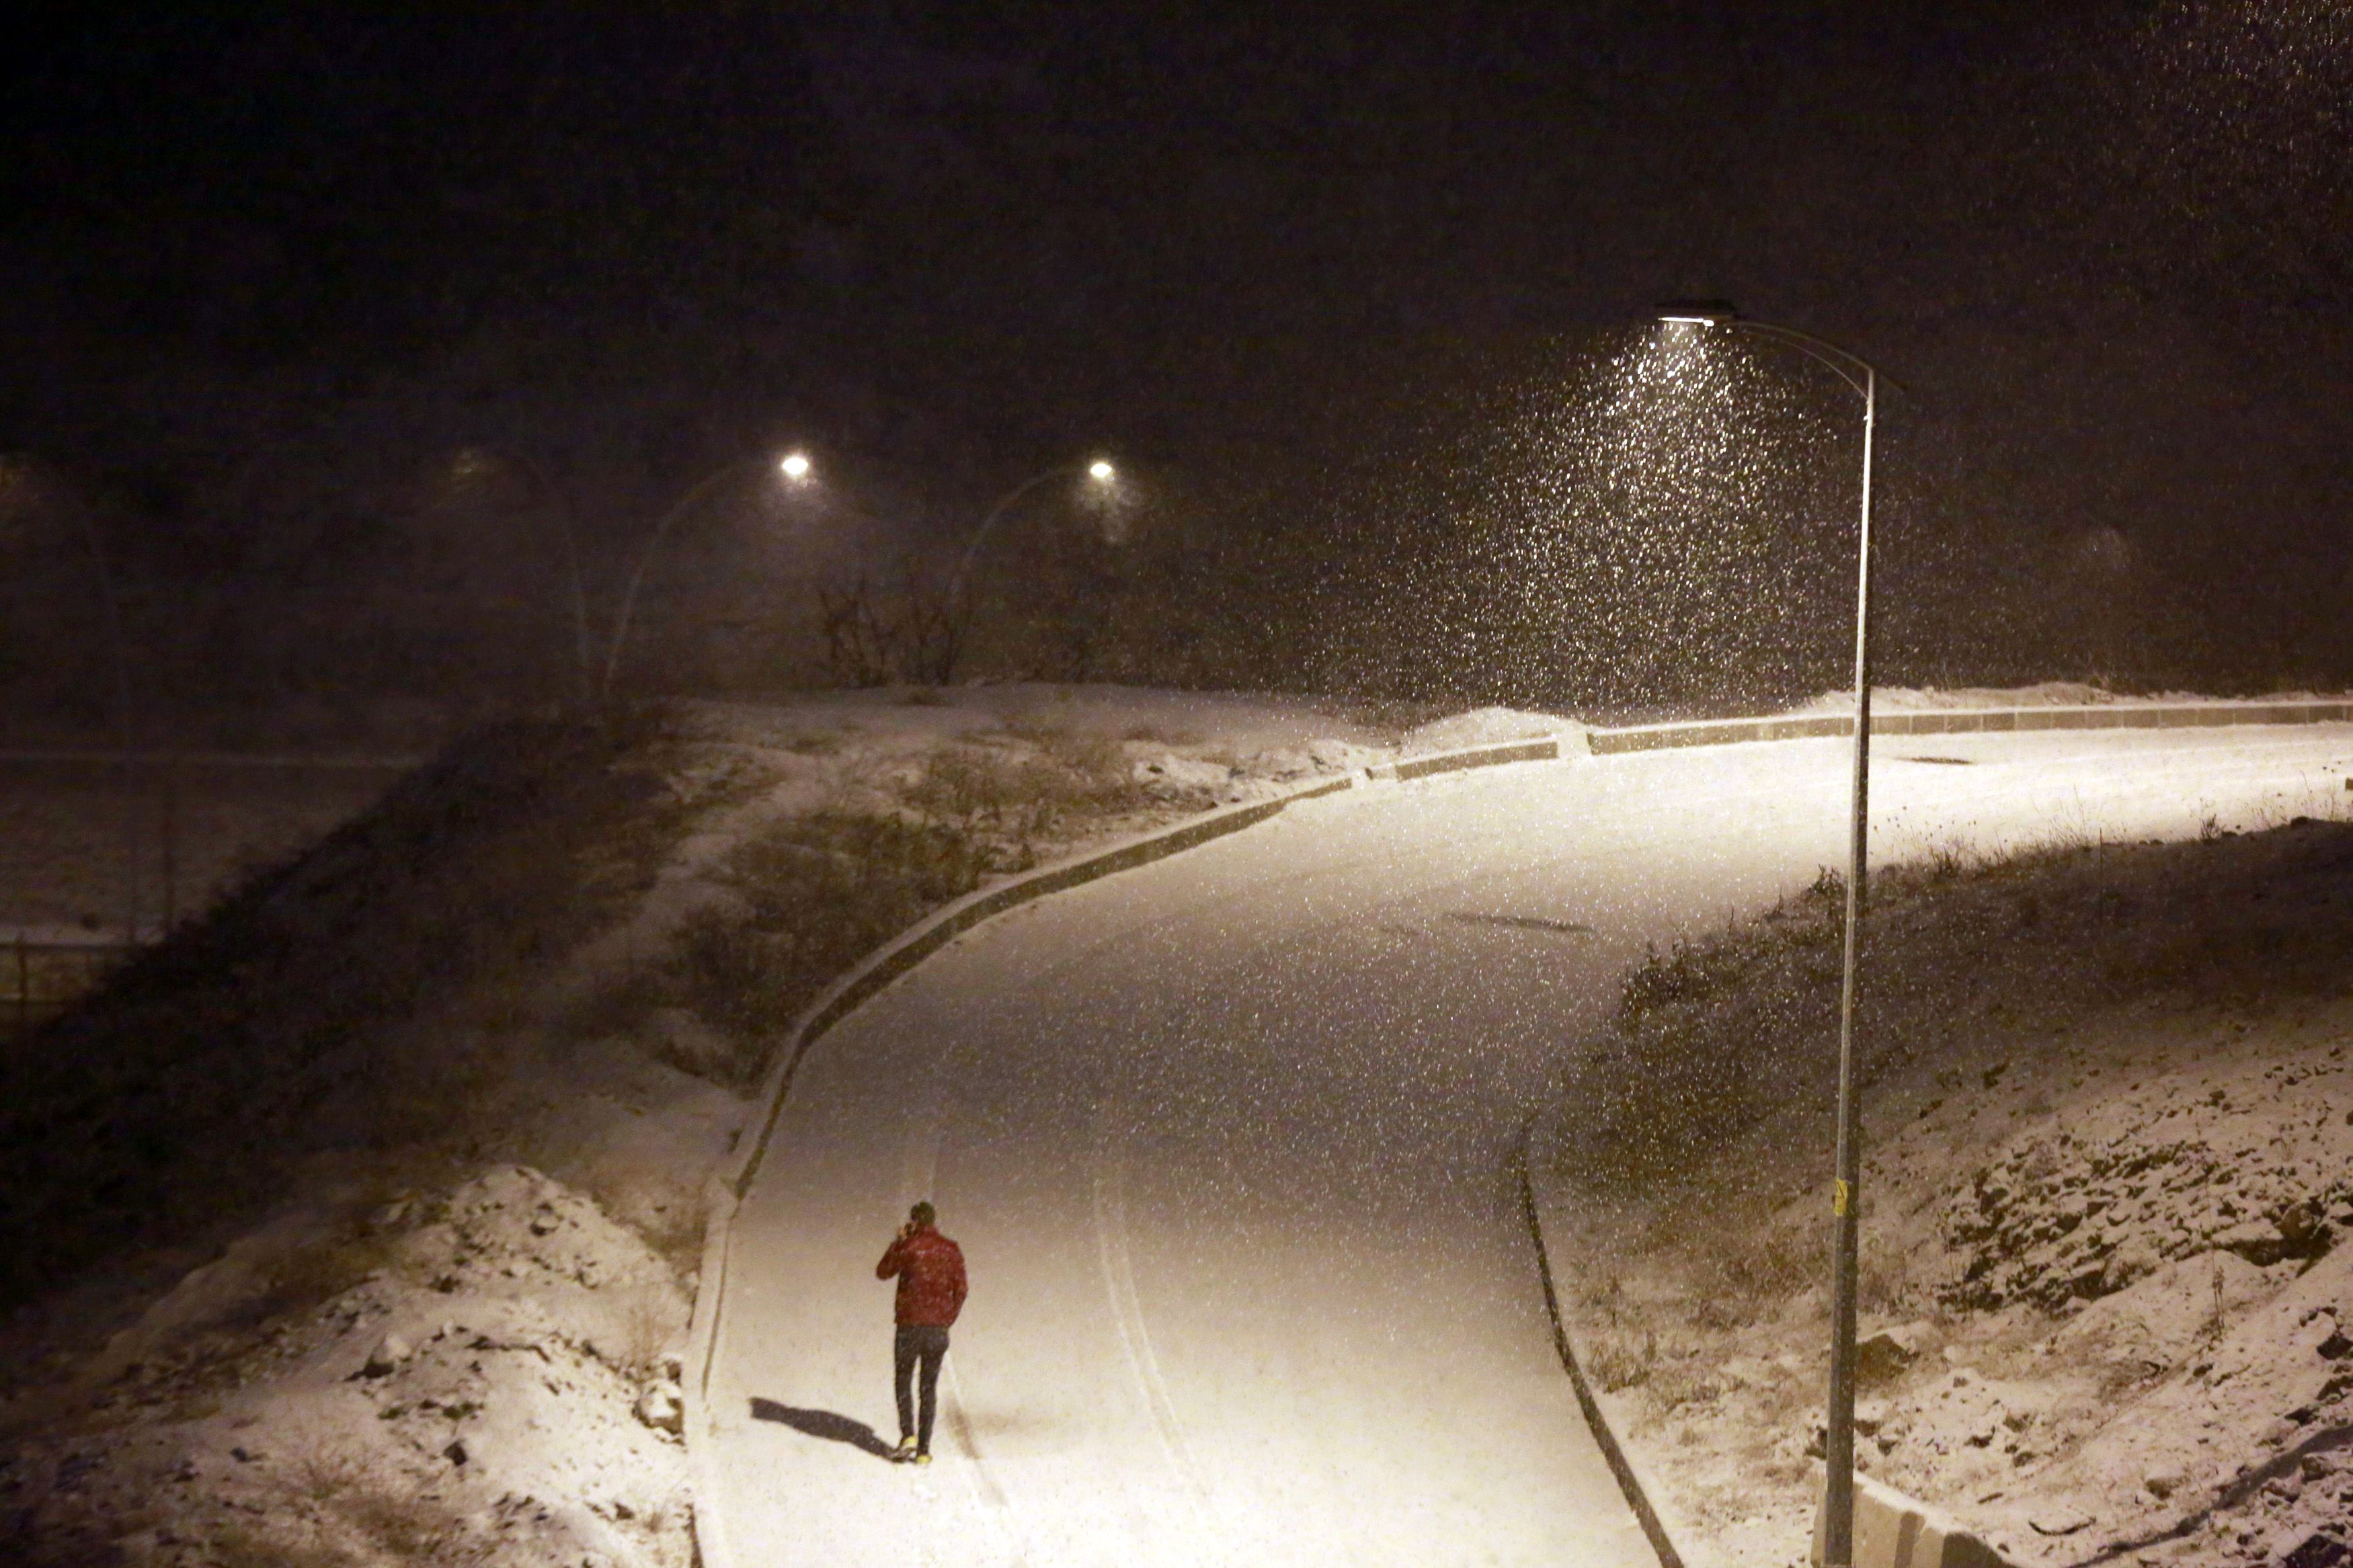 Muscat to Istanbul flights cancelled due to snow